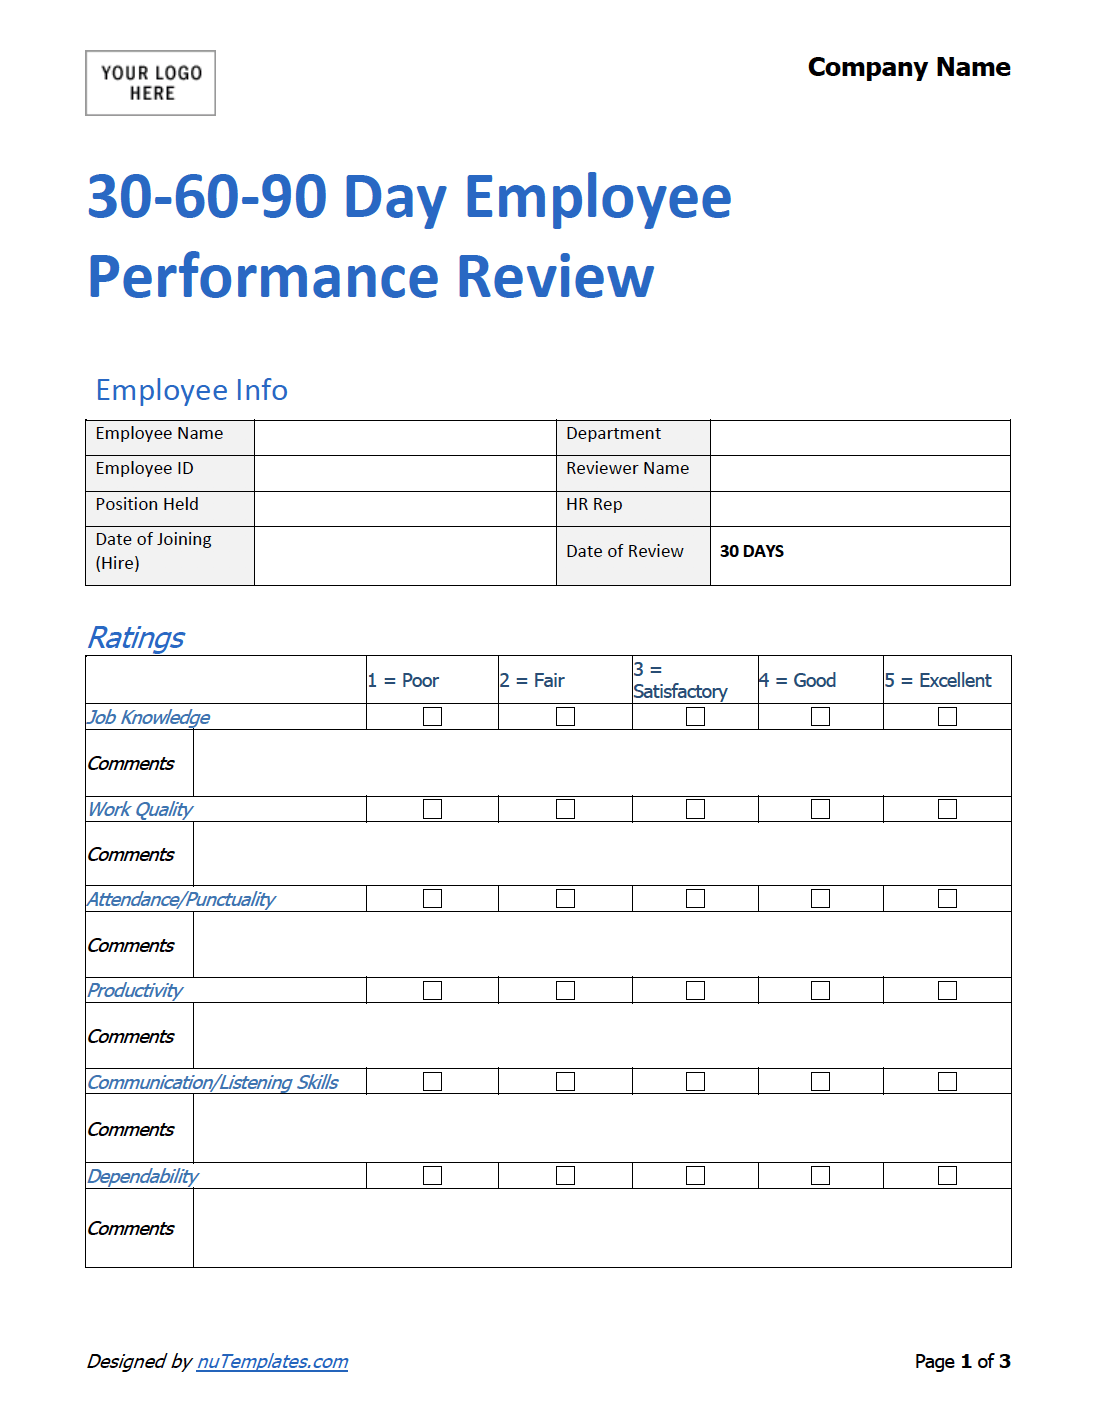 30-60-90-day-employee-performance-review-template-nutemplates-free-hot-nude-porn-pic-gallery